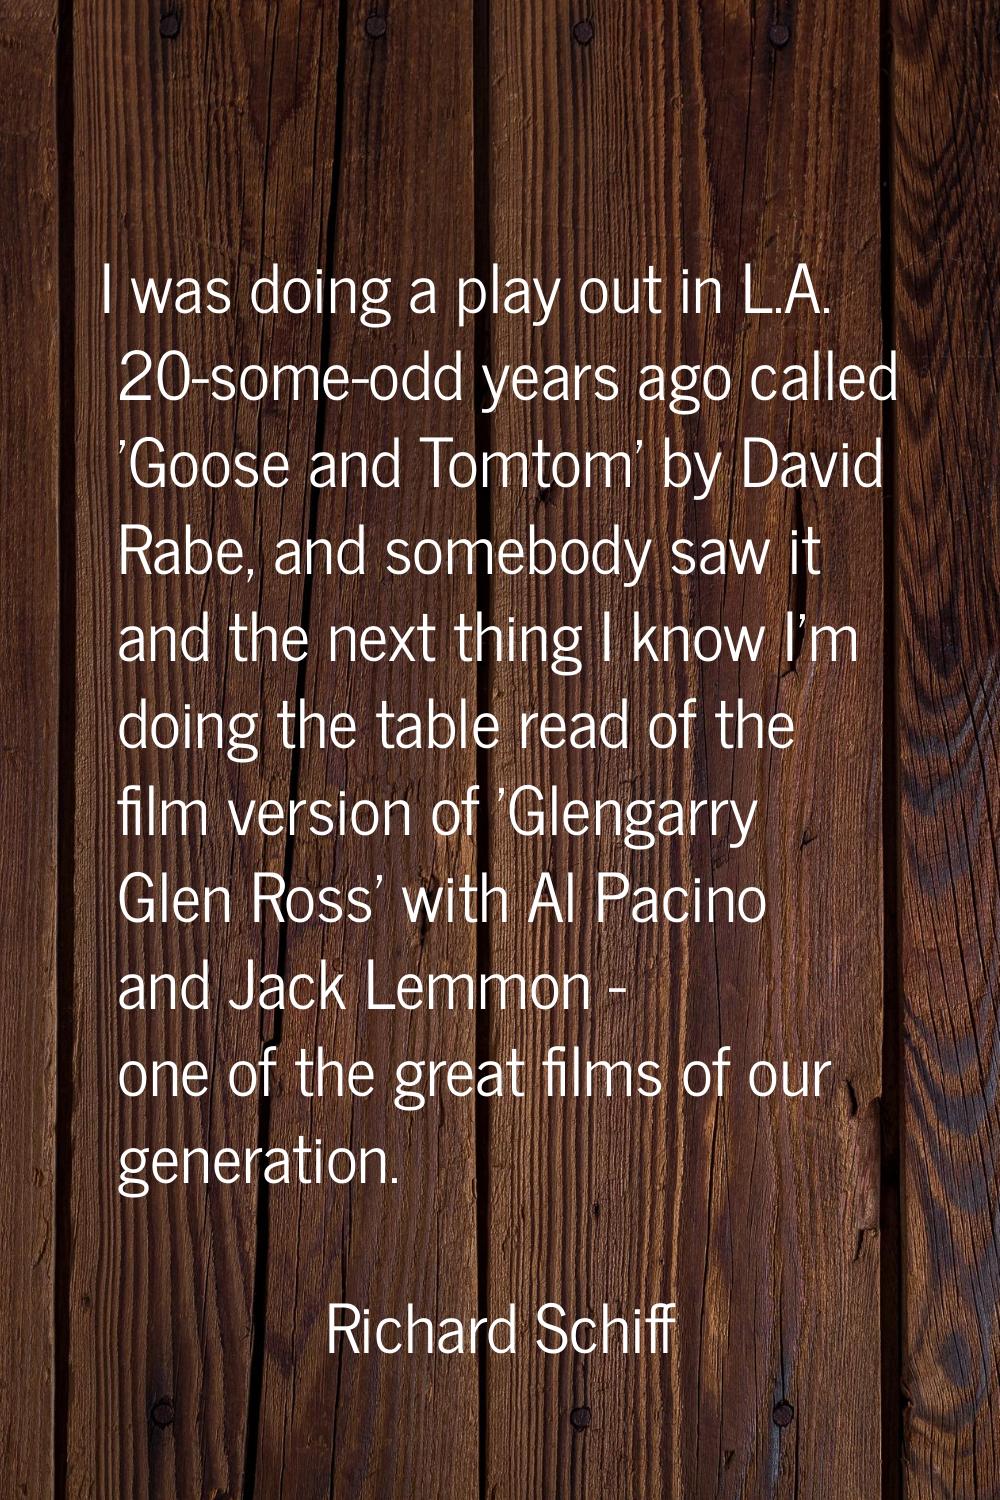 I was doing a play out in L.A. 20-some-odd years ago called 'Goose and Tomtom' by David Rabe, and s